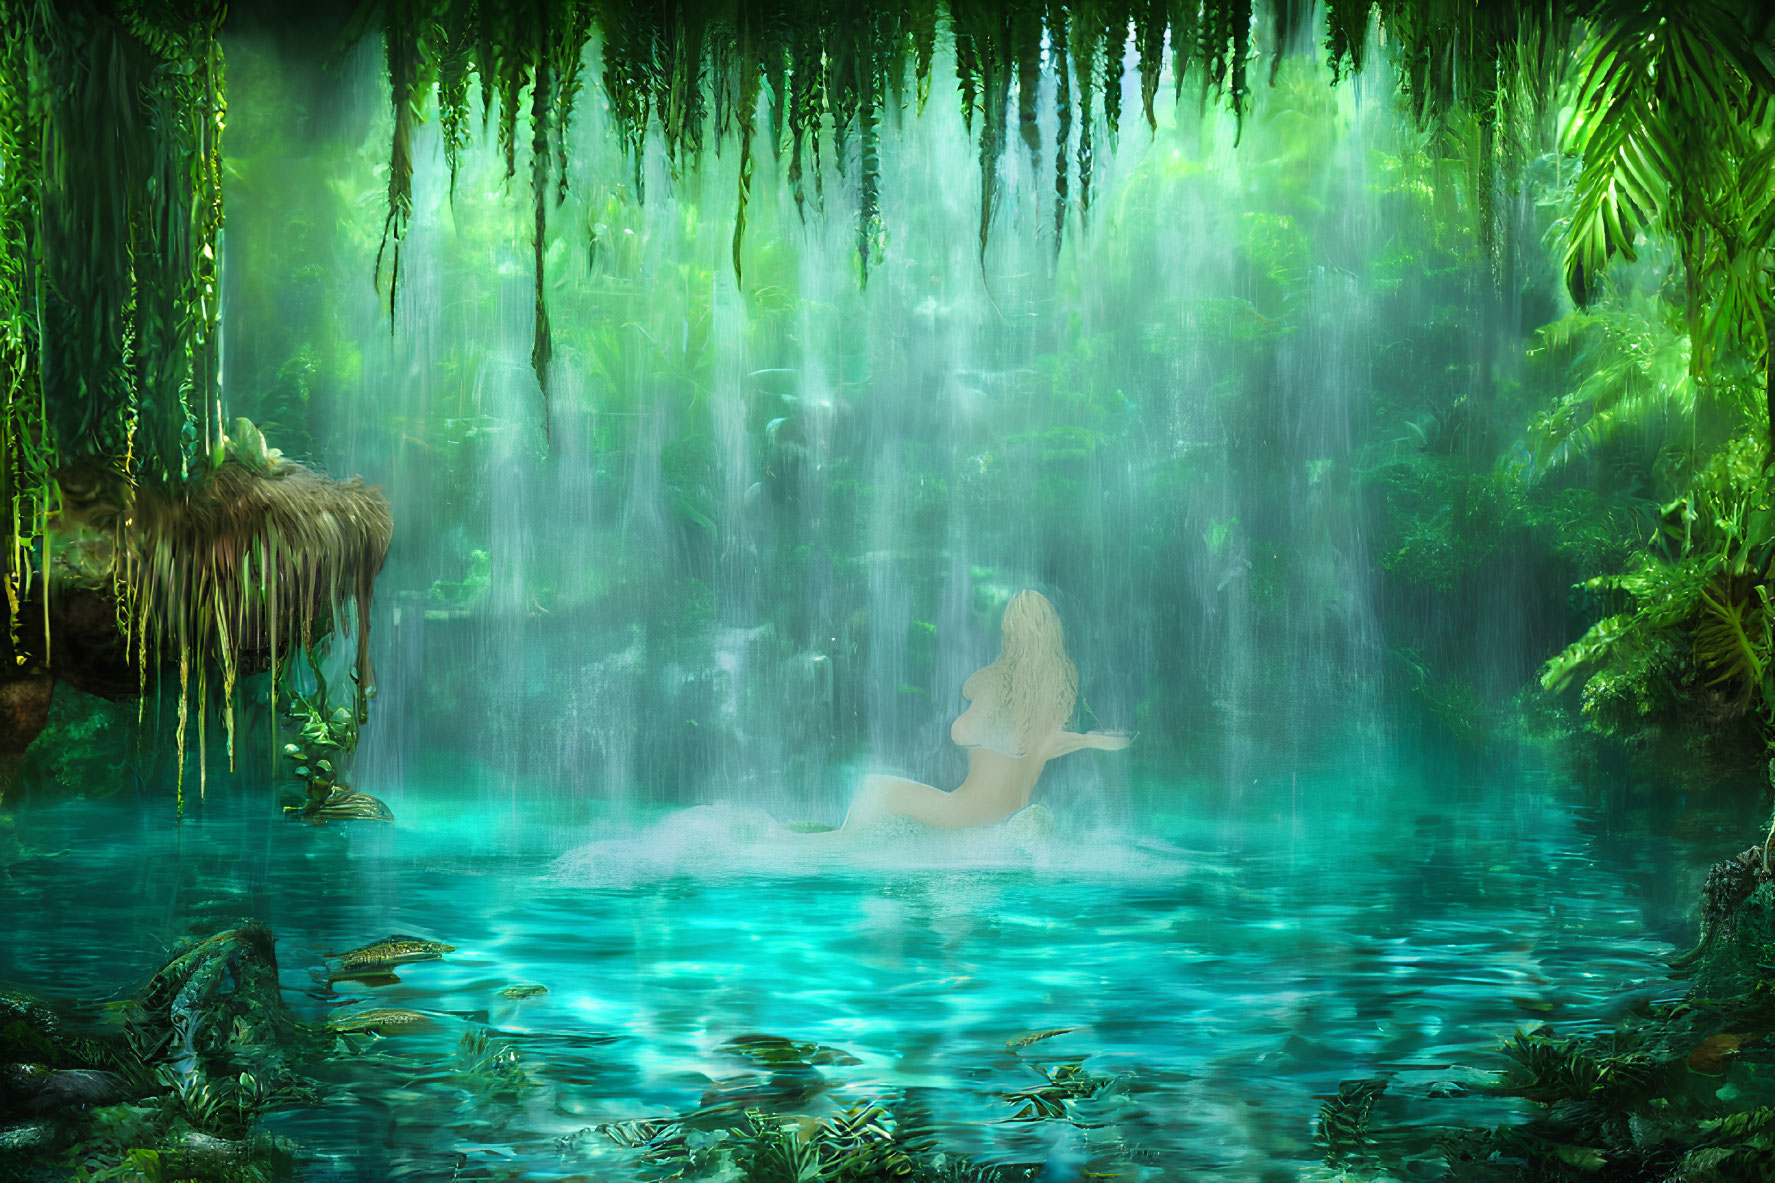 Long-haired mermaid in serene pond of lush jungle with waterfalls